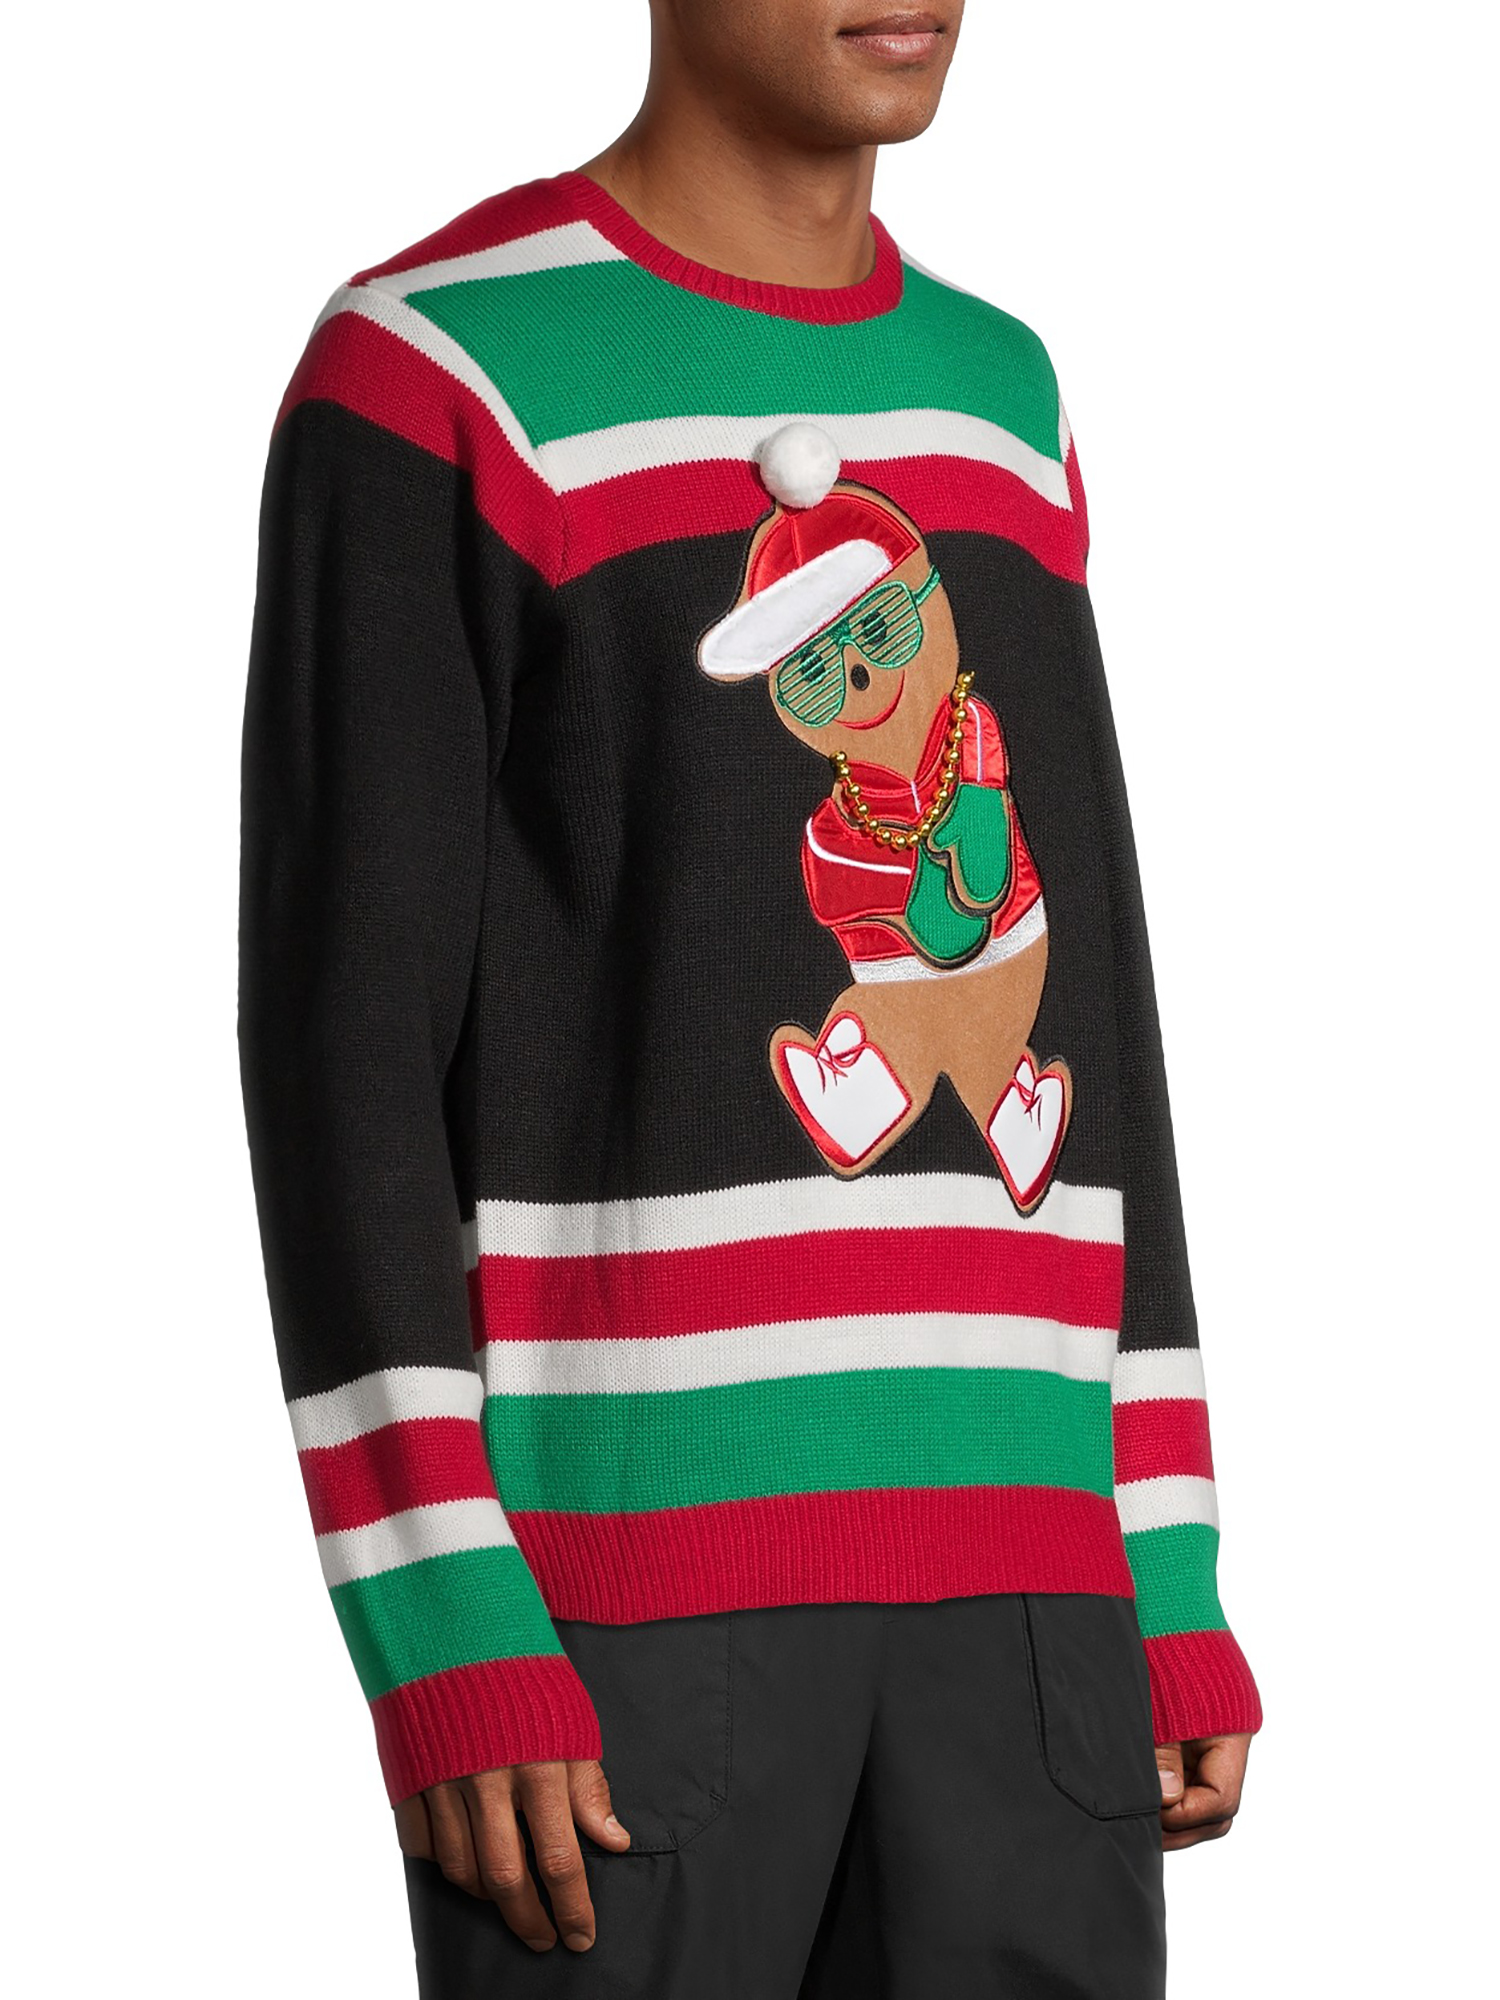 Holiday Time Men's and Big Men's Ugly Christmas Sweater - image 2 of 6